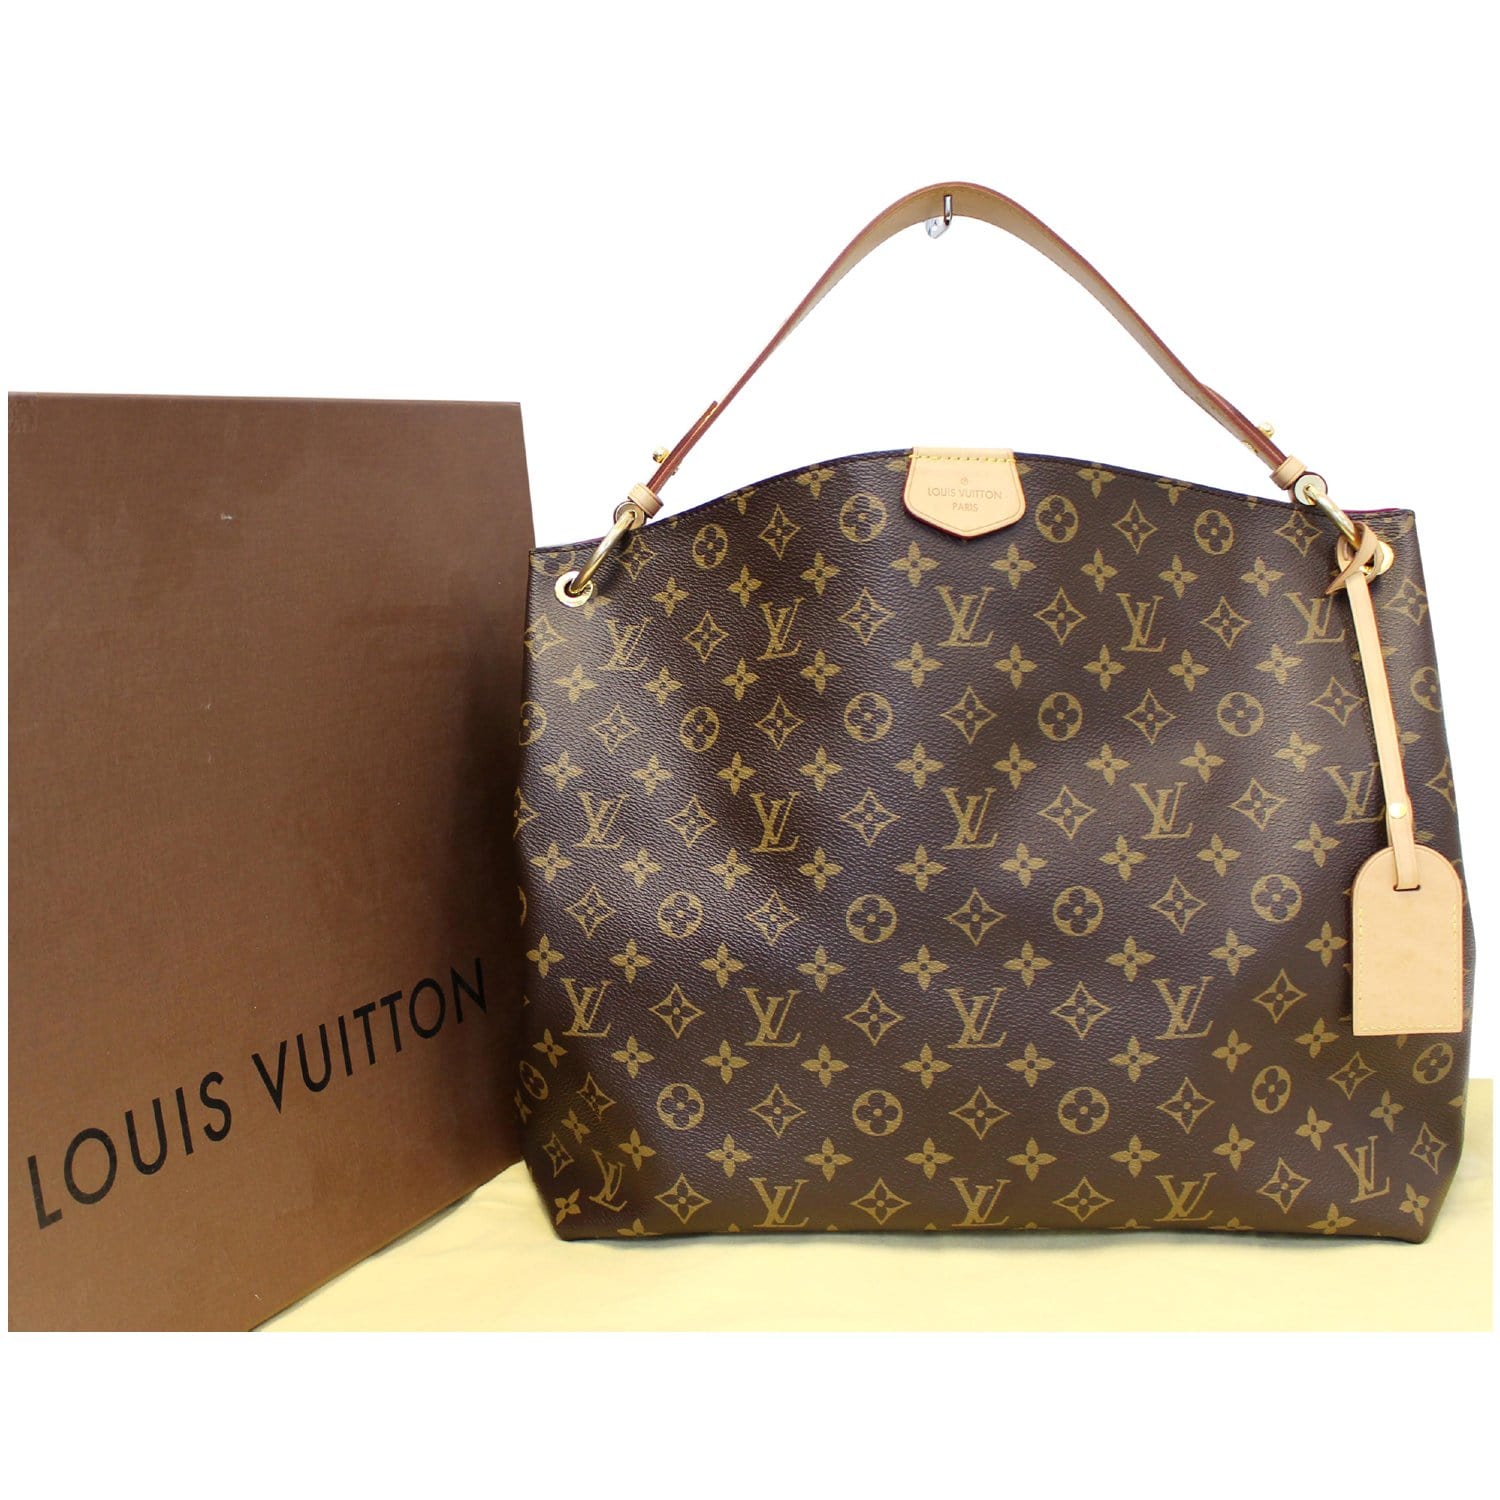 Graceful MM is here! Thanks to this group for helping me find it! : r/ Louisvuitton